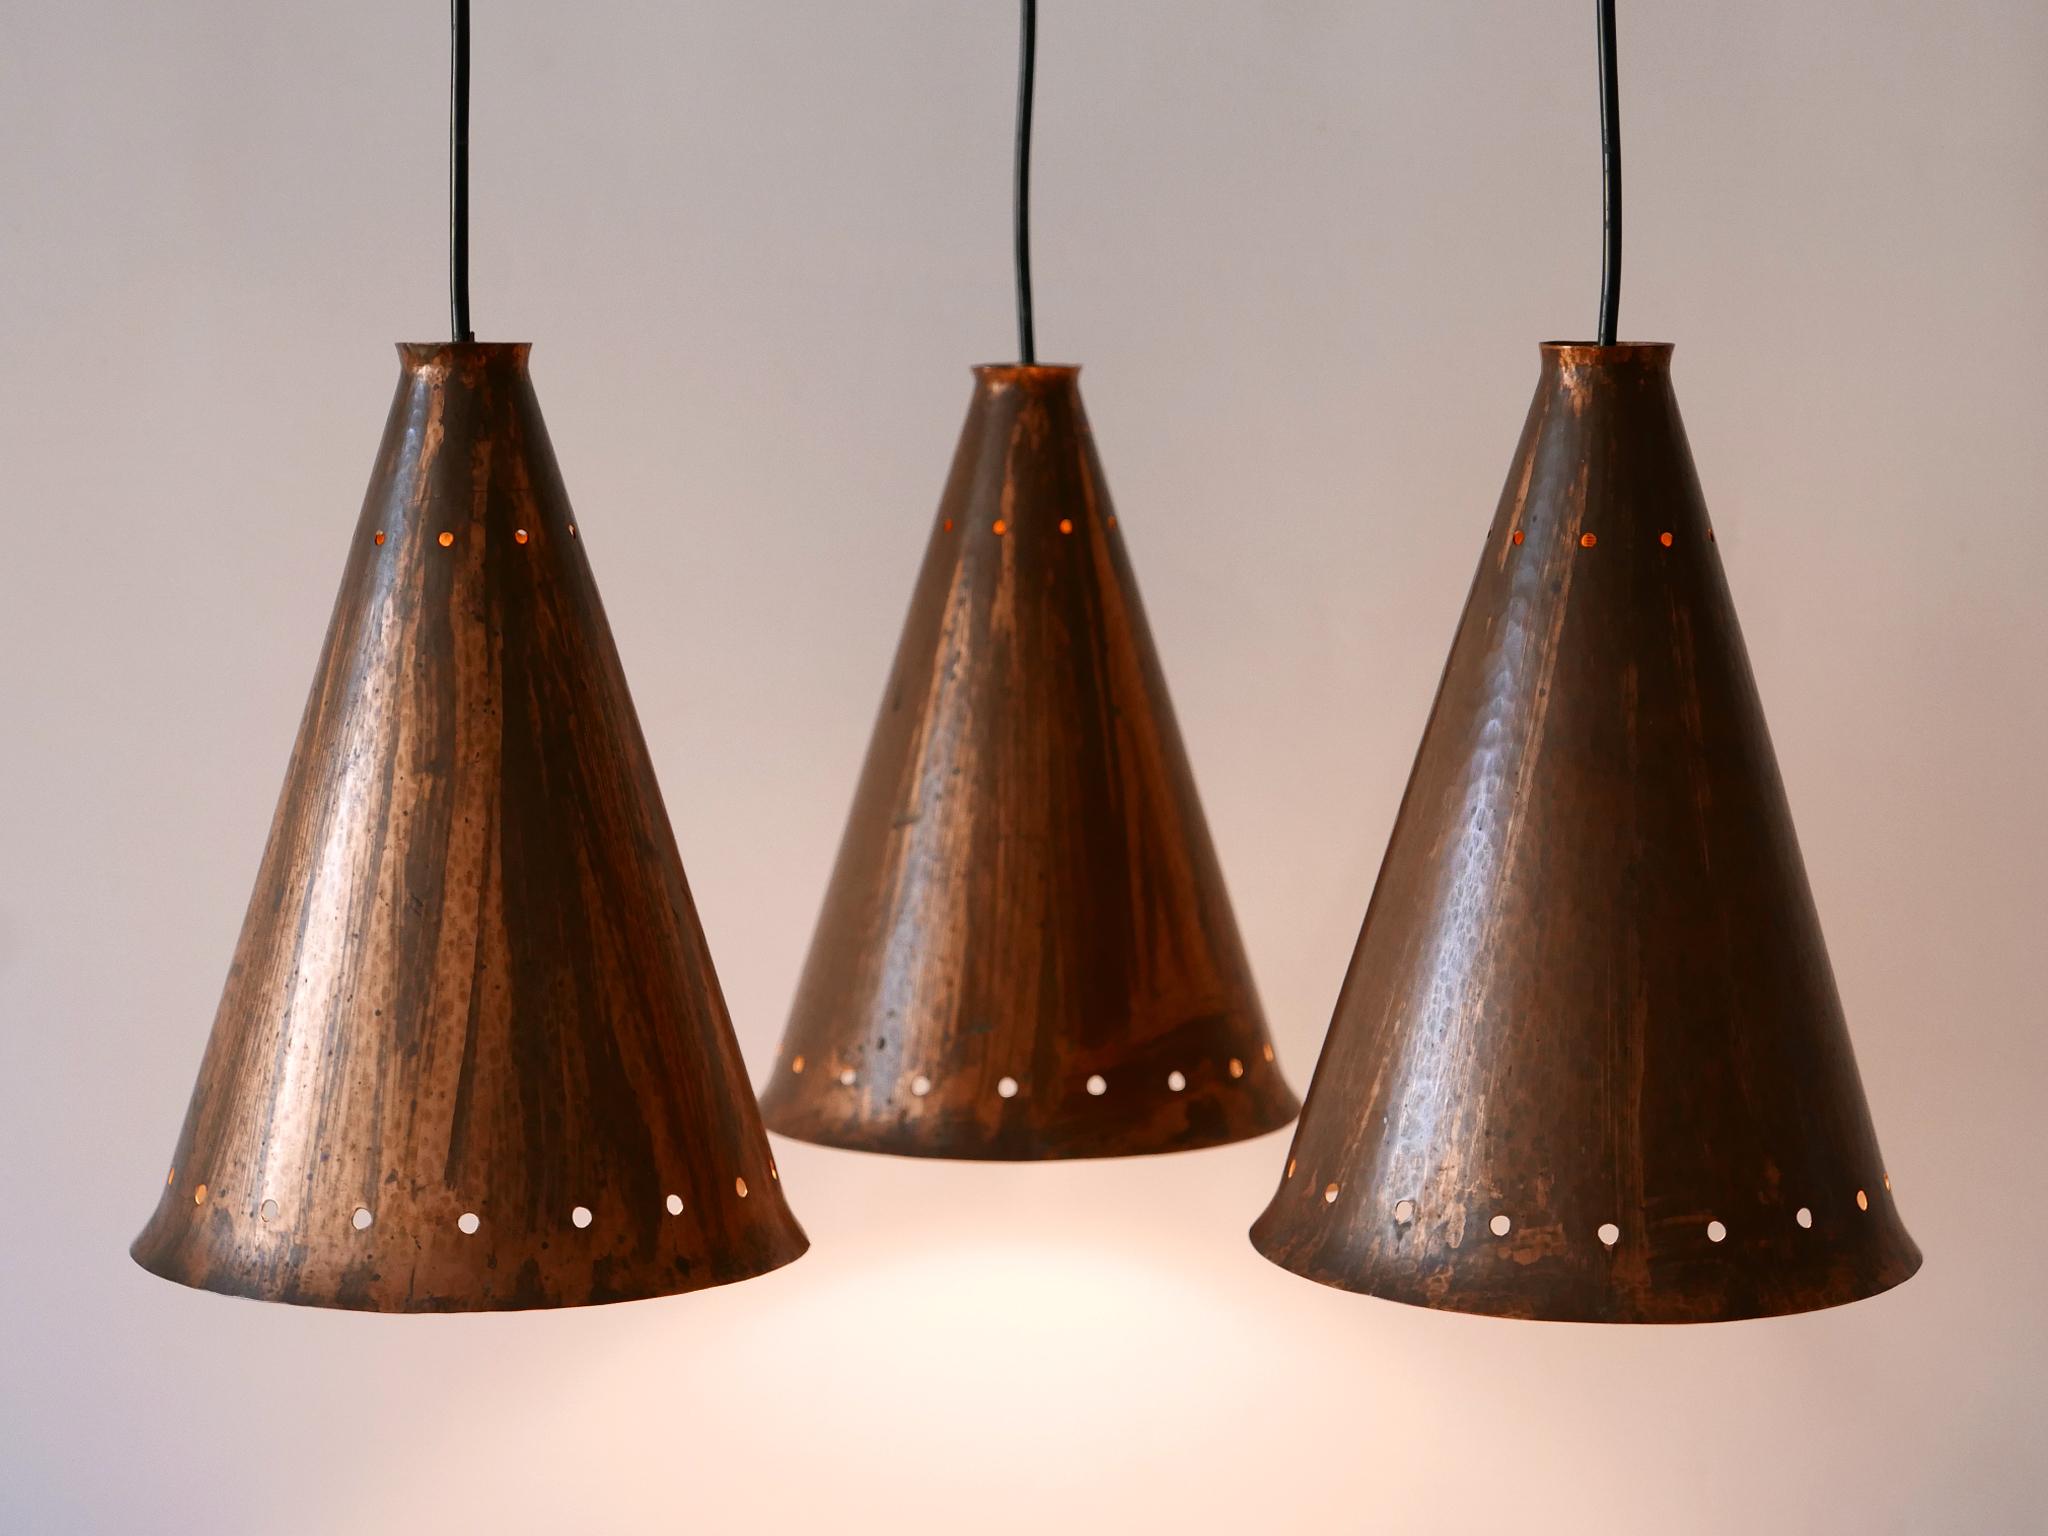 Exceptional & Large Mid-Century Modern Copper Pendant Lamp Scandinavia, 1950s For Sale 5